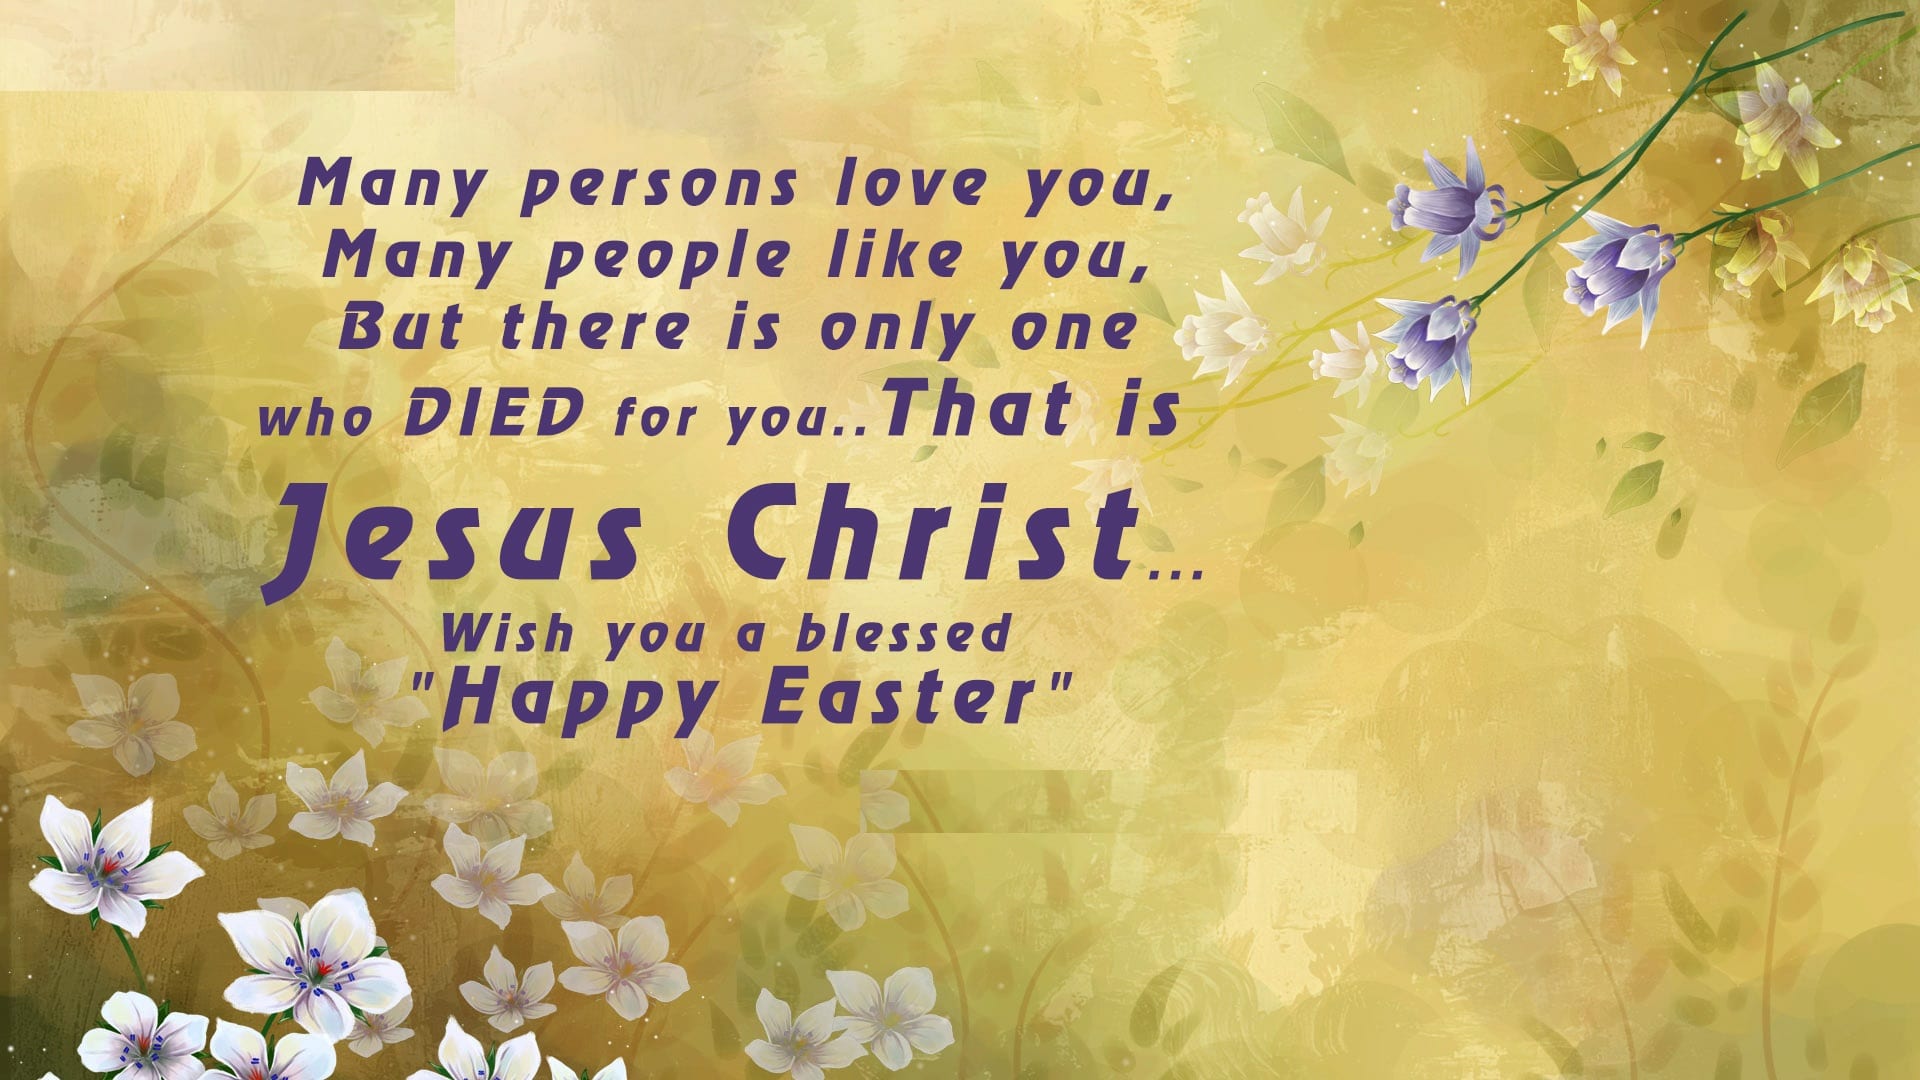 Easter Sunday Quotes